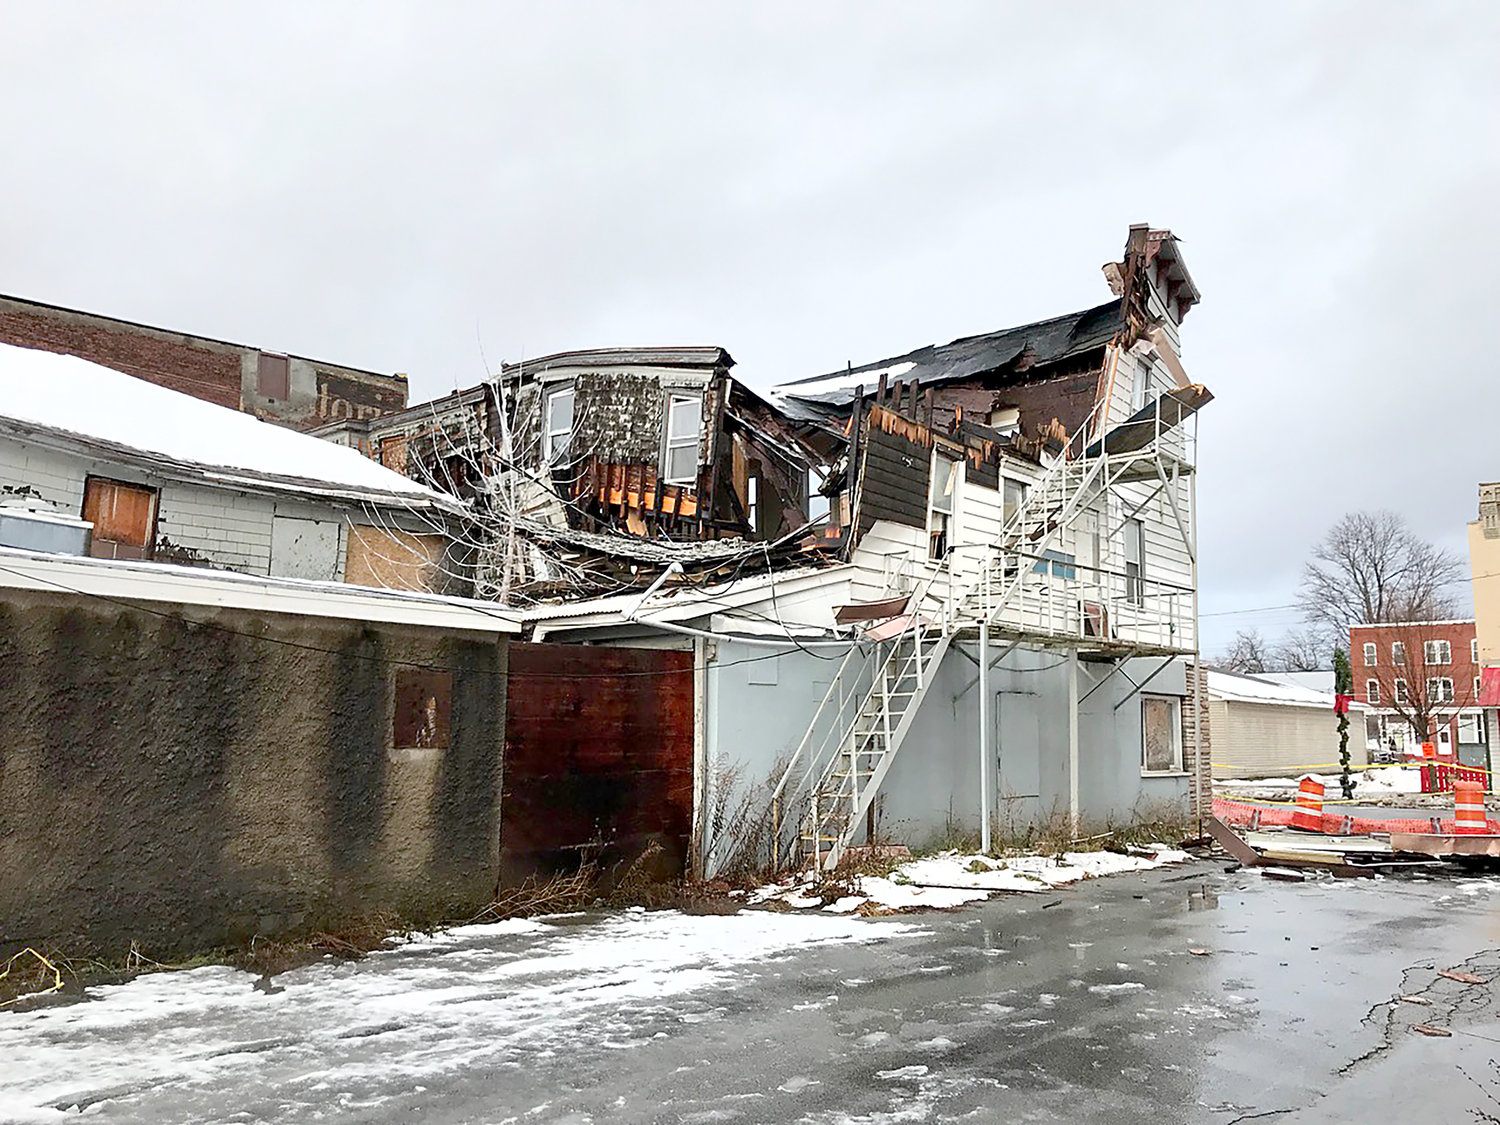 A fire escape seems to be supporting the remaining structure Friday morning on Madison Street in Oneida after much of the building collapsed Thursday.